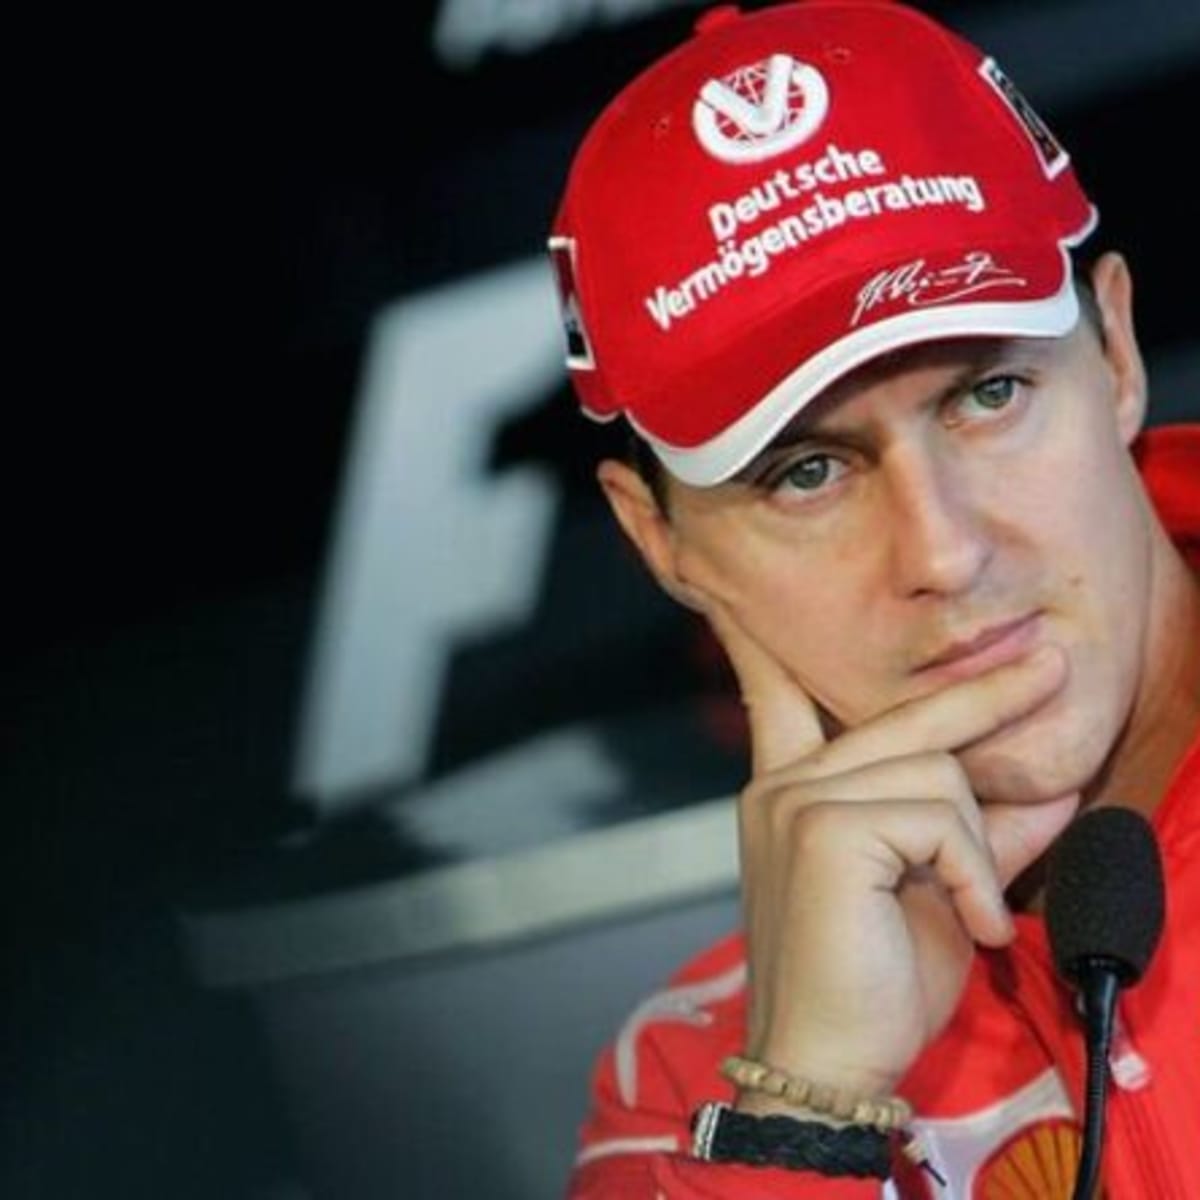 F1 News: What Happened to Michael Schumacher and What Have We